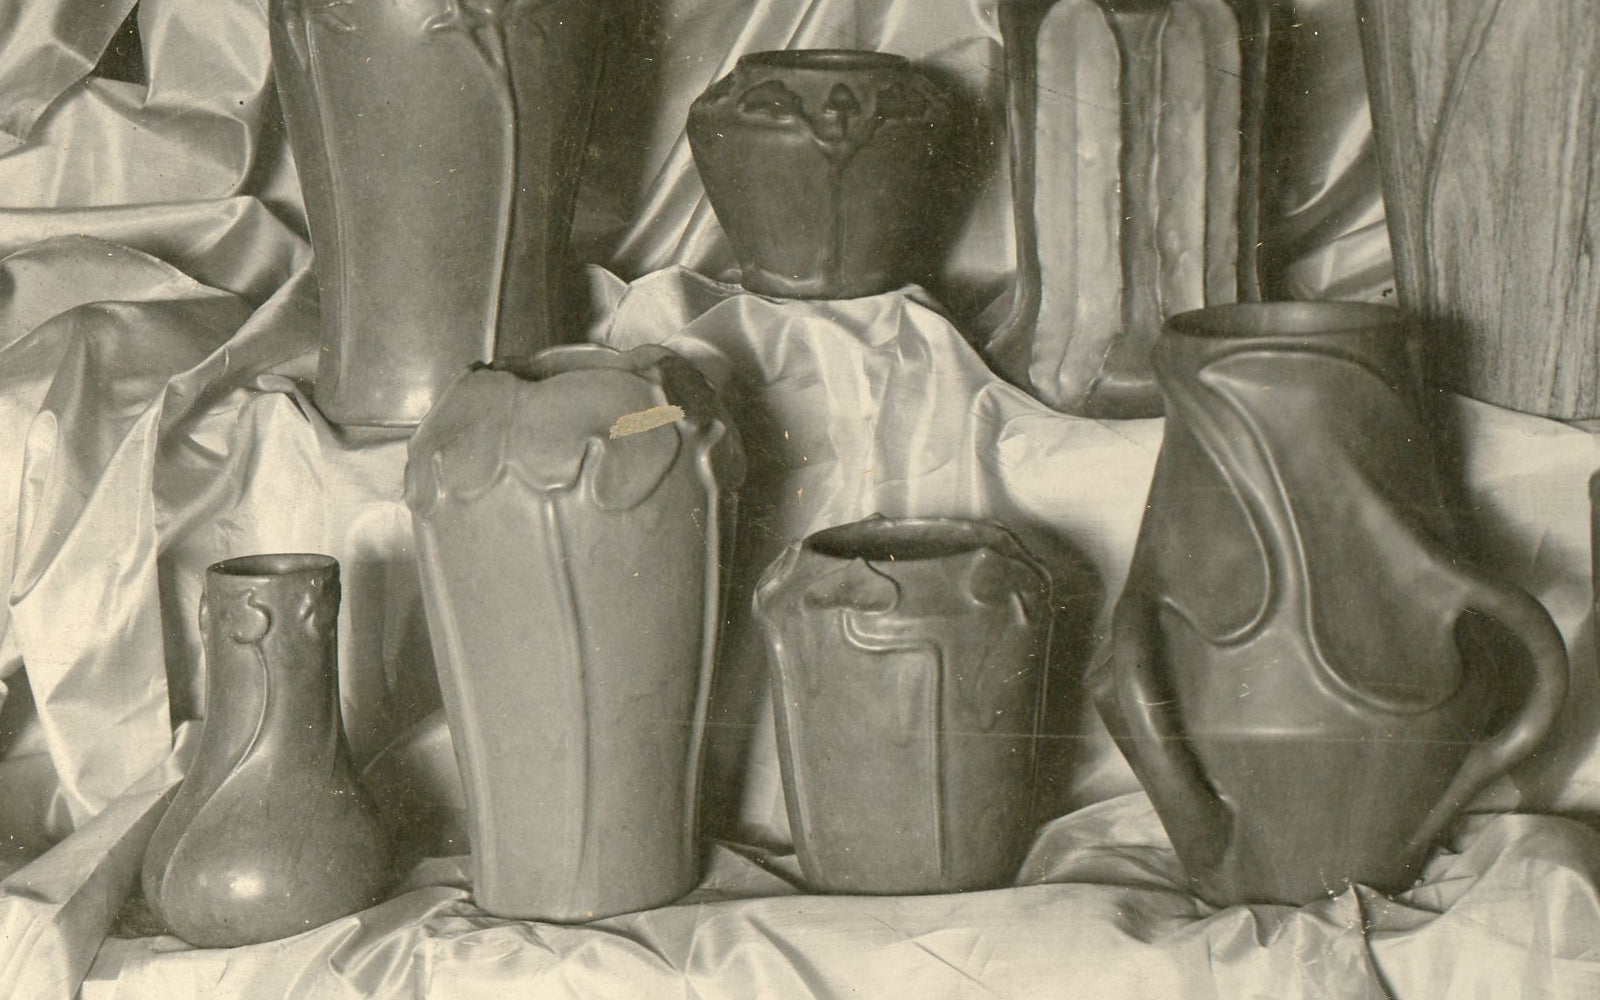 A collection of historic vases during the Stable Studio days. 